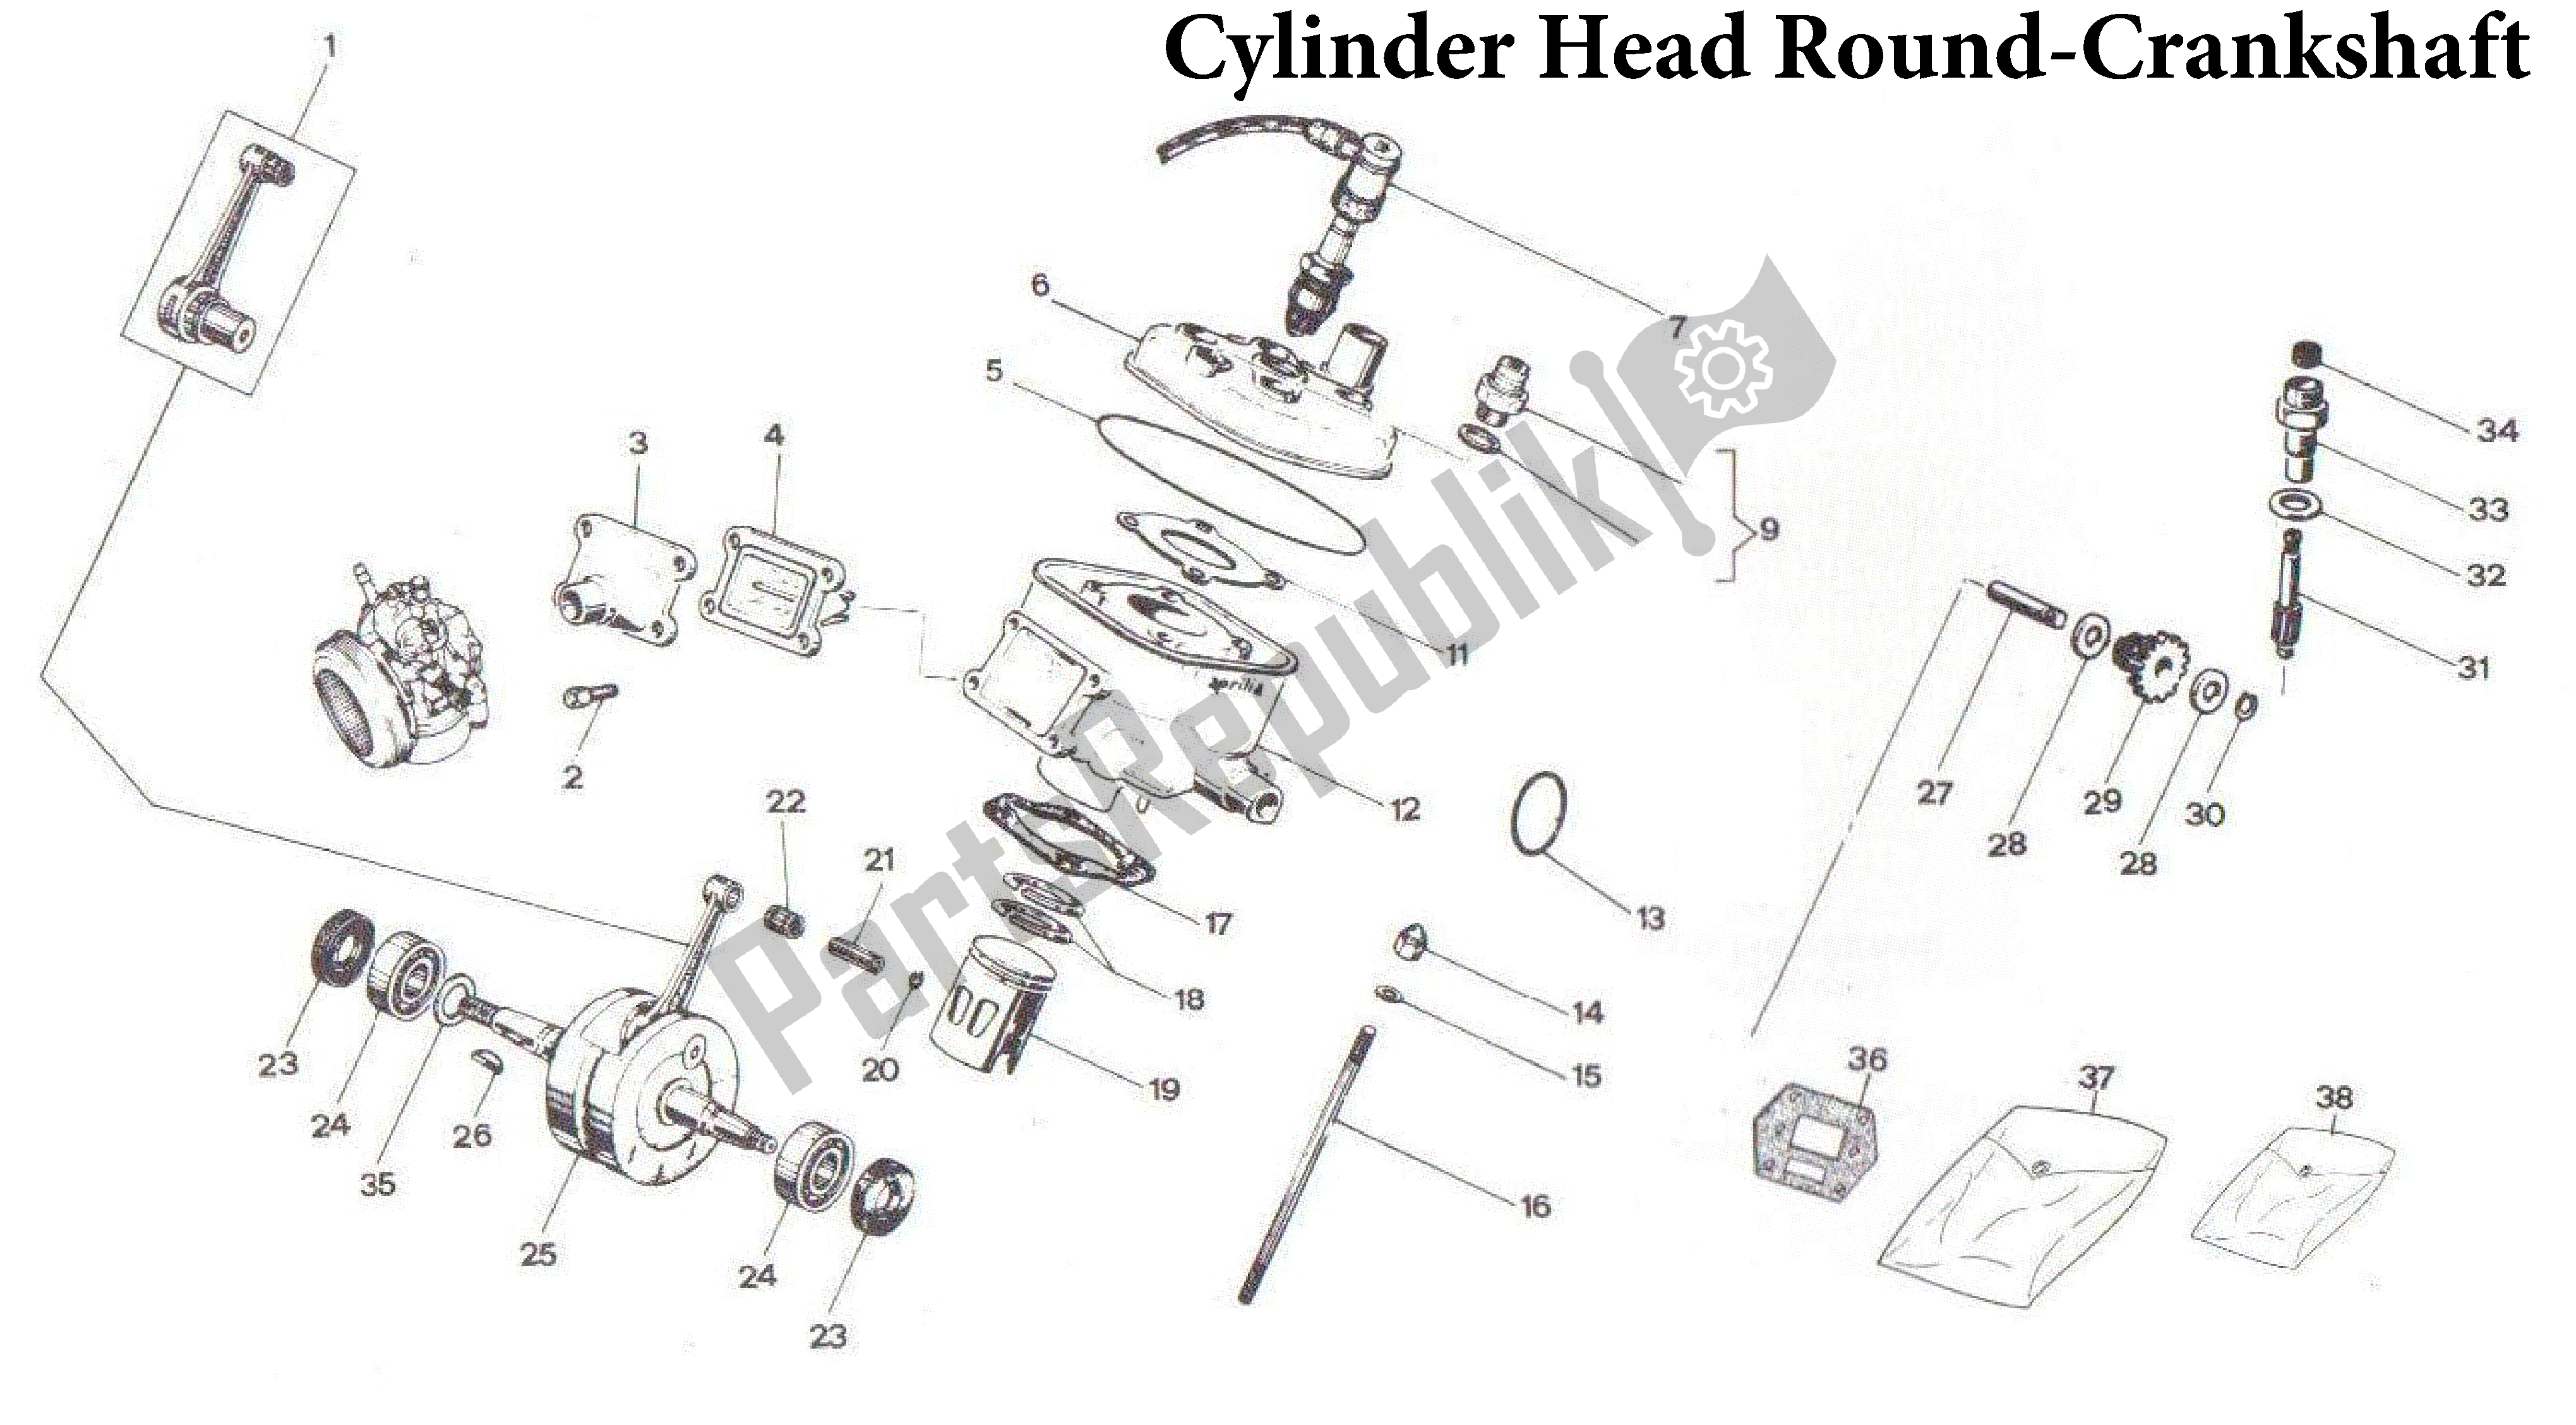 All parts for the Cylinder Head Round-crankshaft of the Aprilia Scarabeo 50 1998